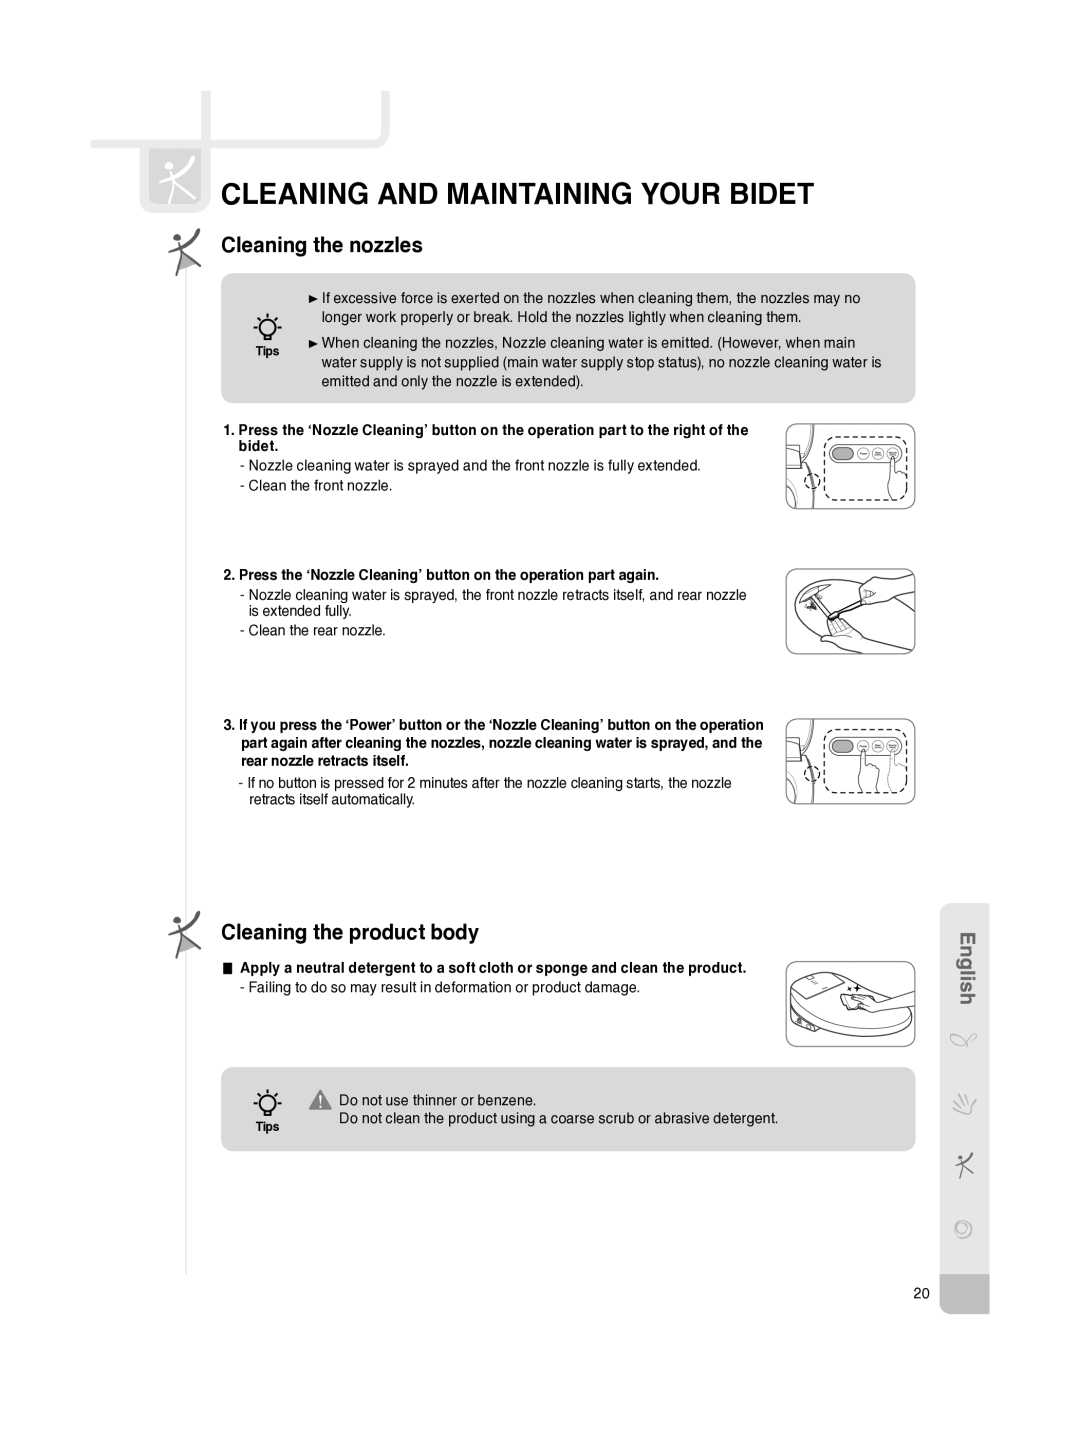 Coway BA13-AE, BA13-BE, BA13-BR manual Cleaning and maintaining your bidet, Cleaning the nozzles, Cleaning the product body 